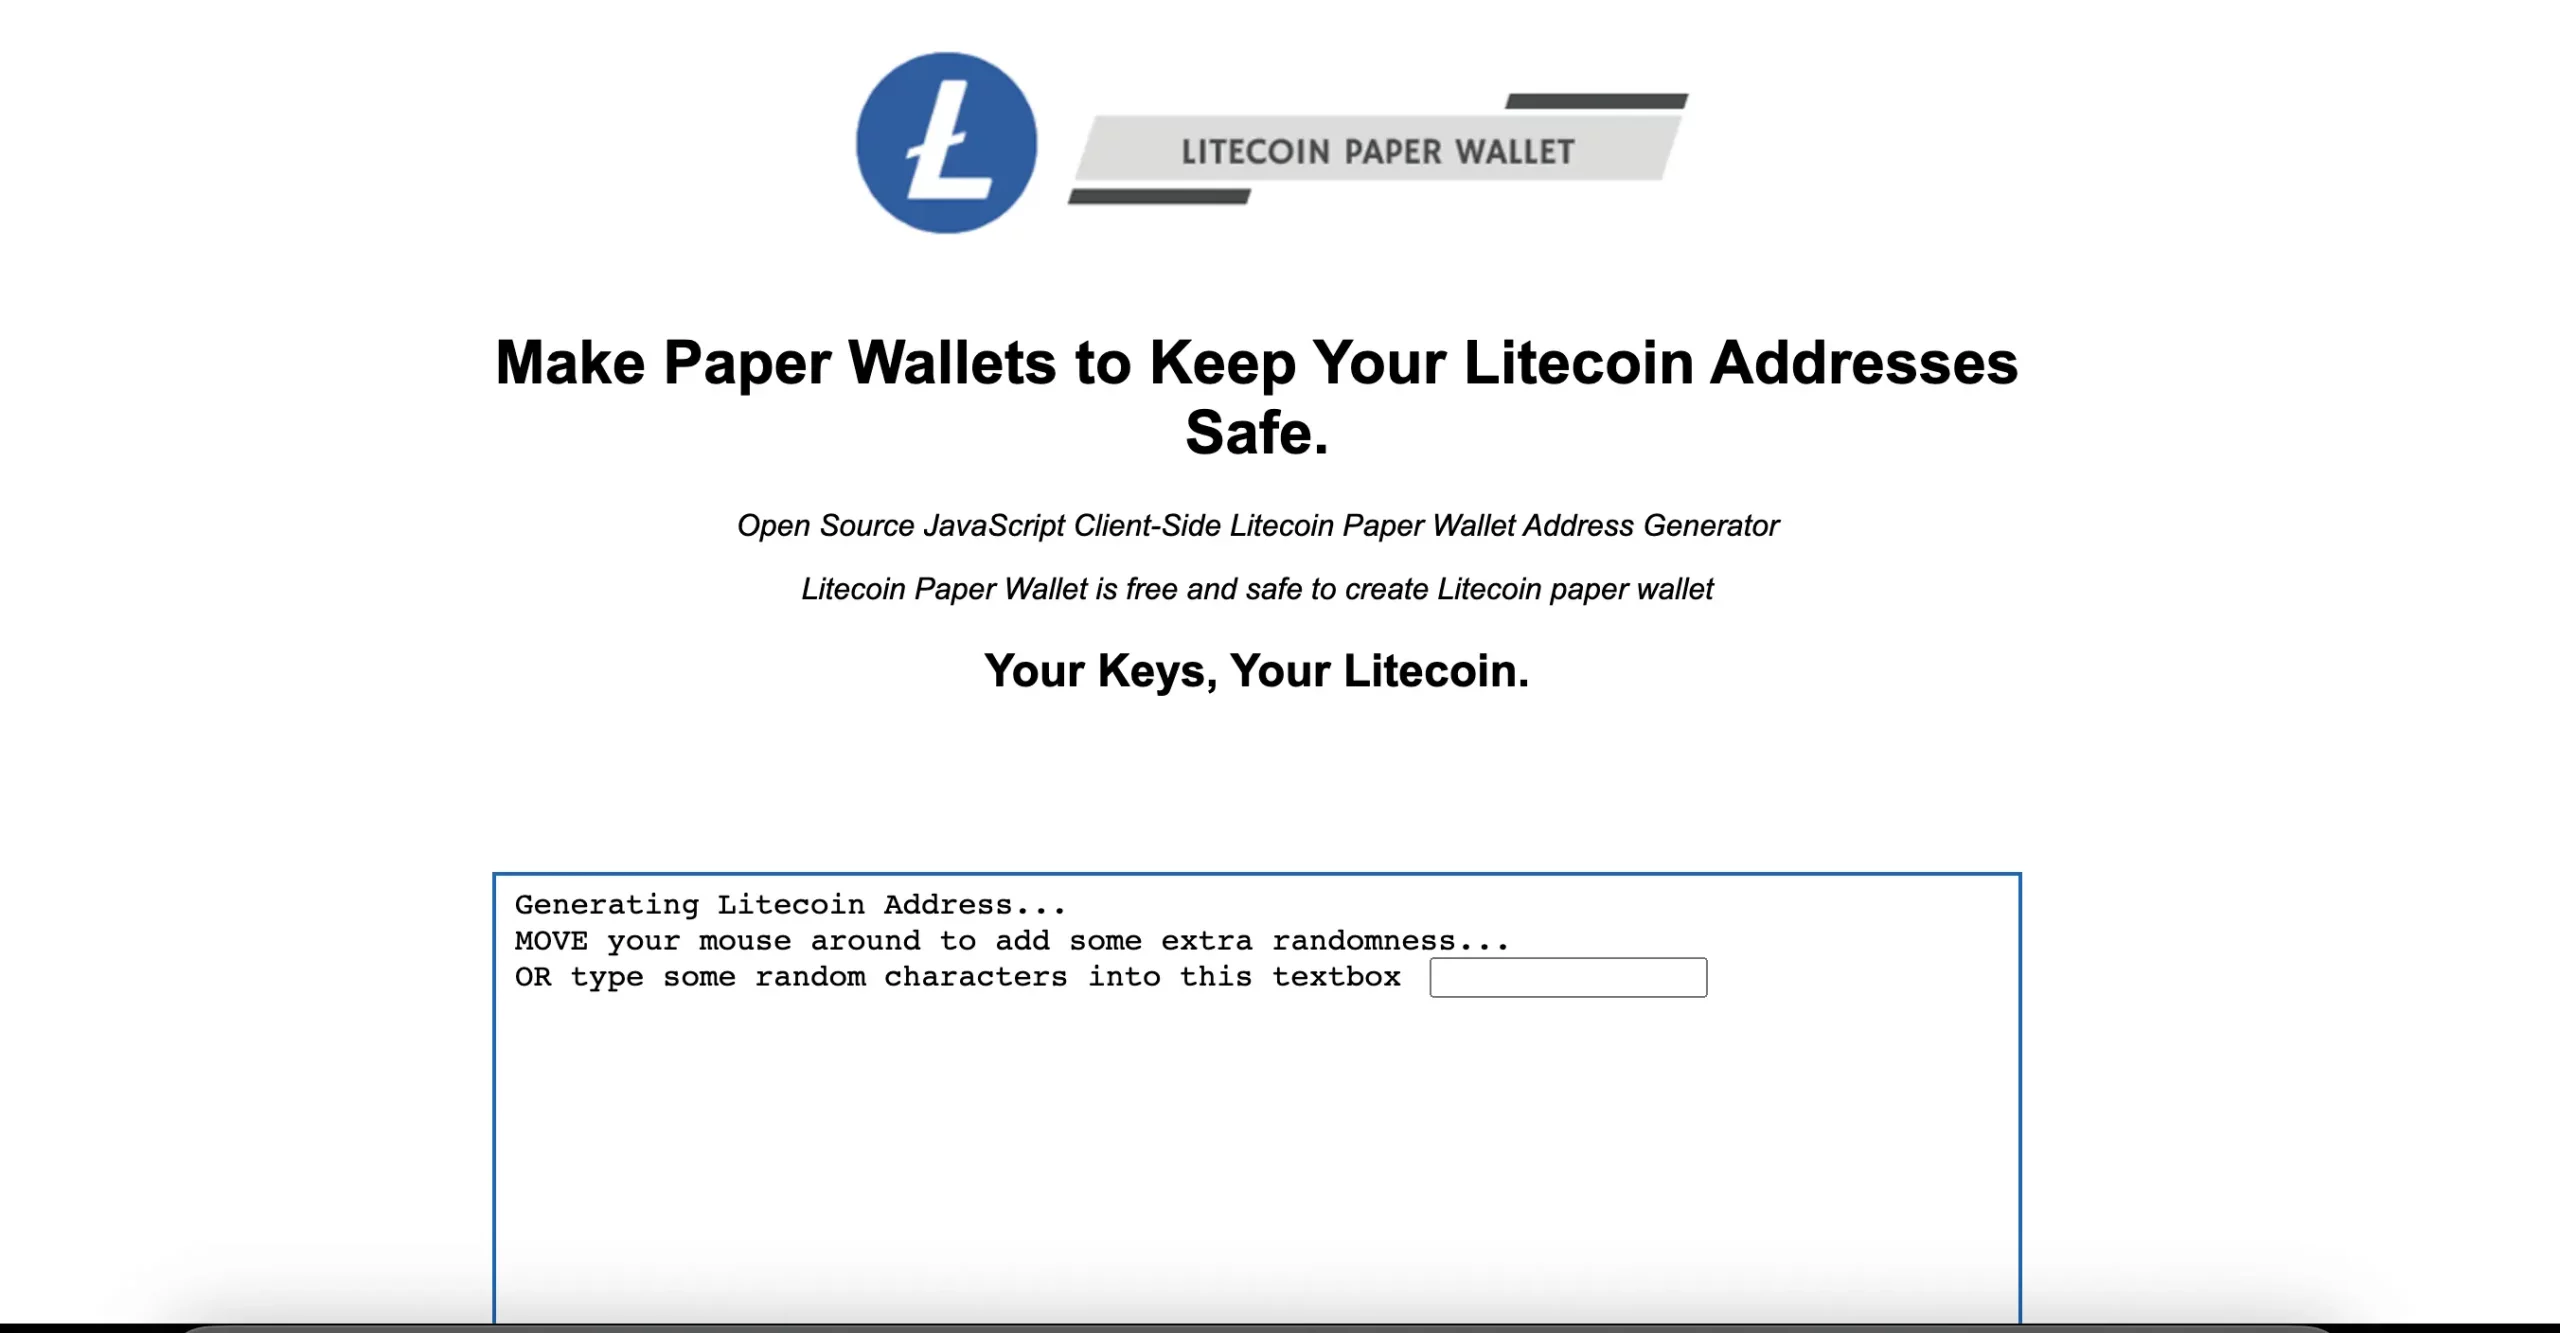 How to Create and Spend a Litecoin Paper Wallet — The Litecoin School